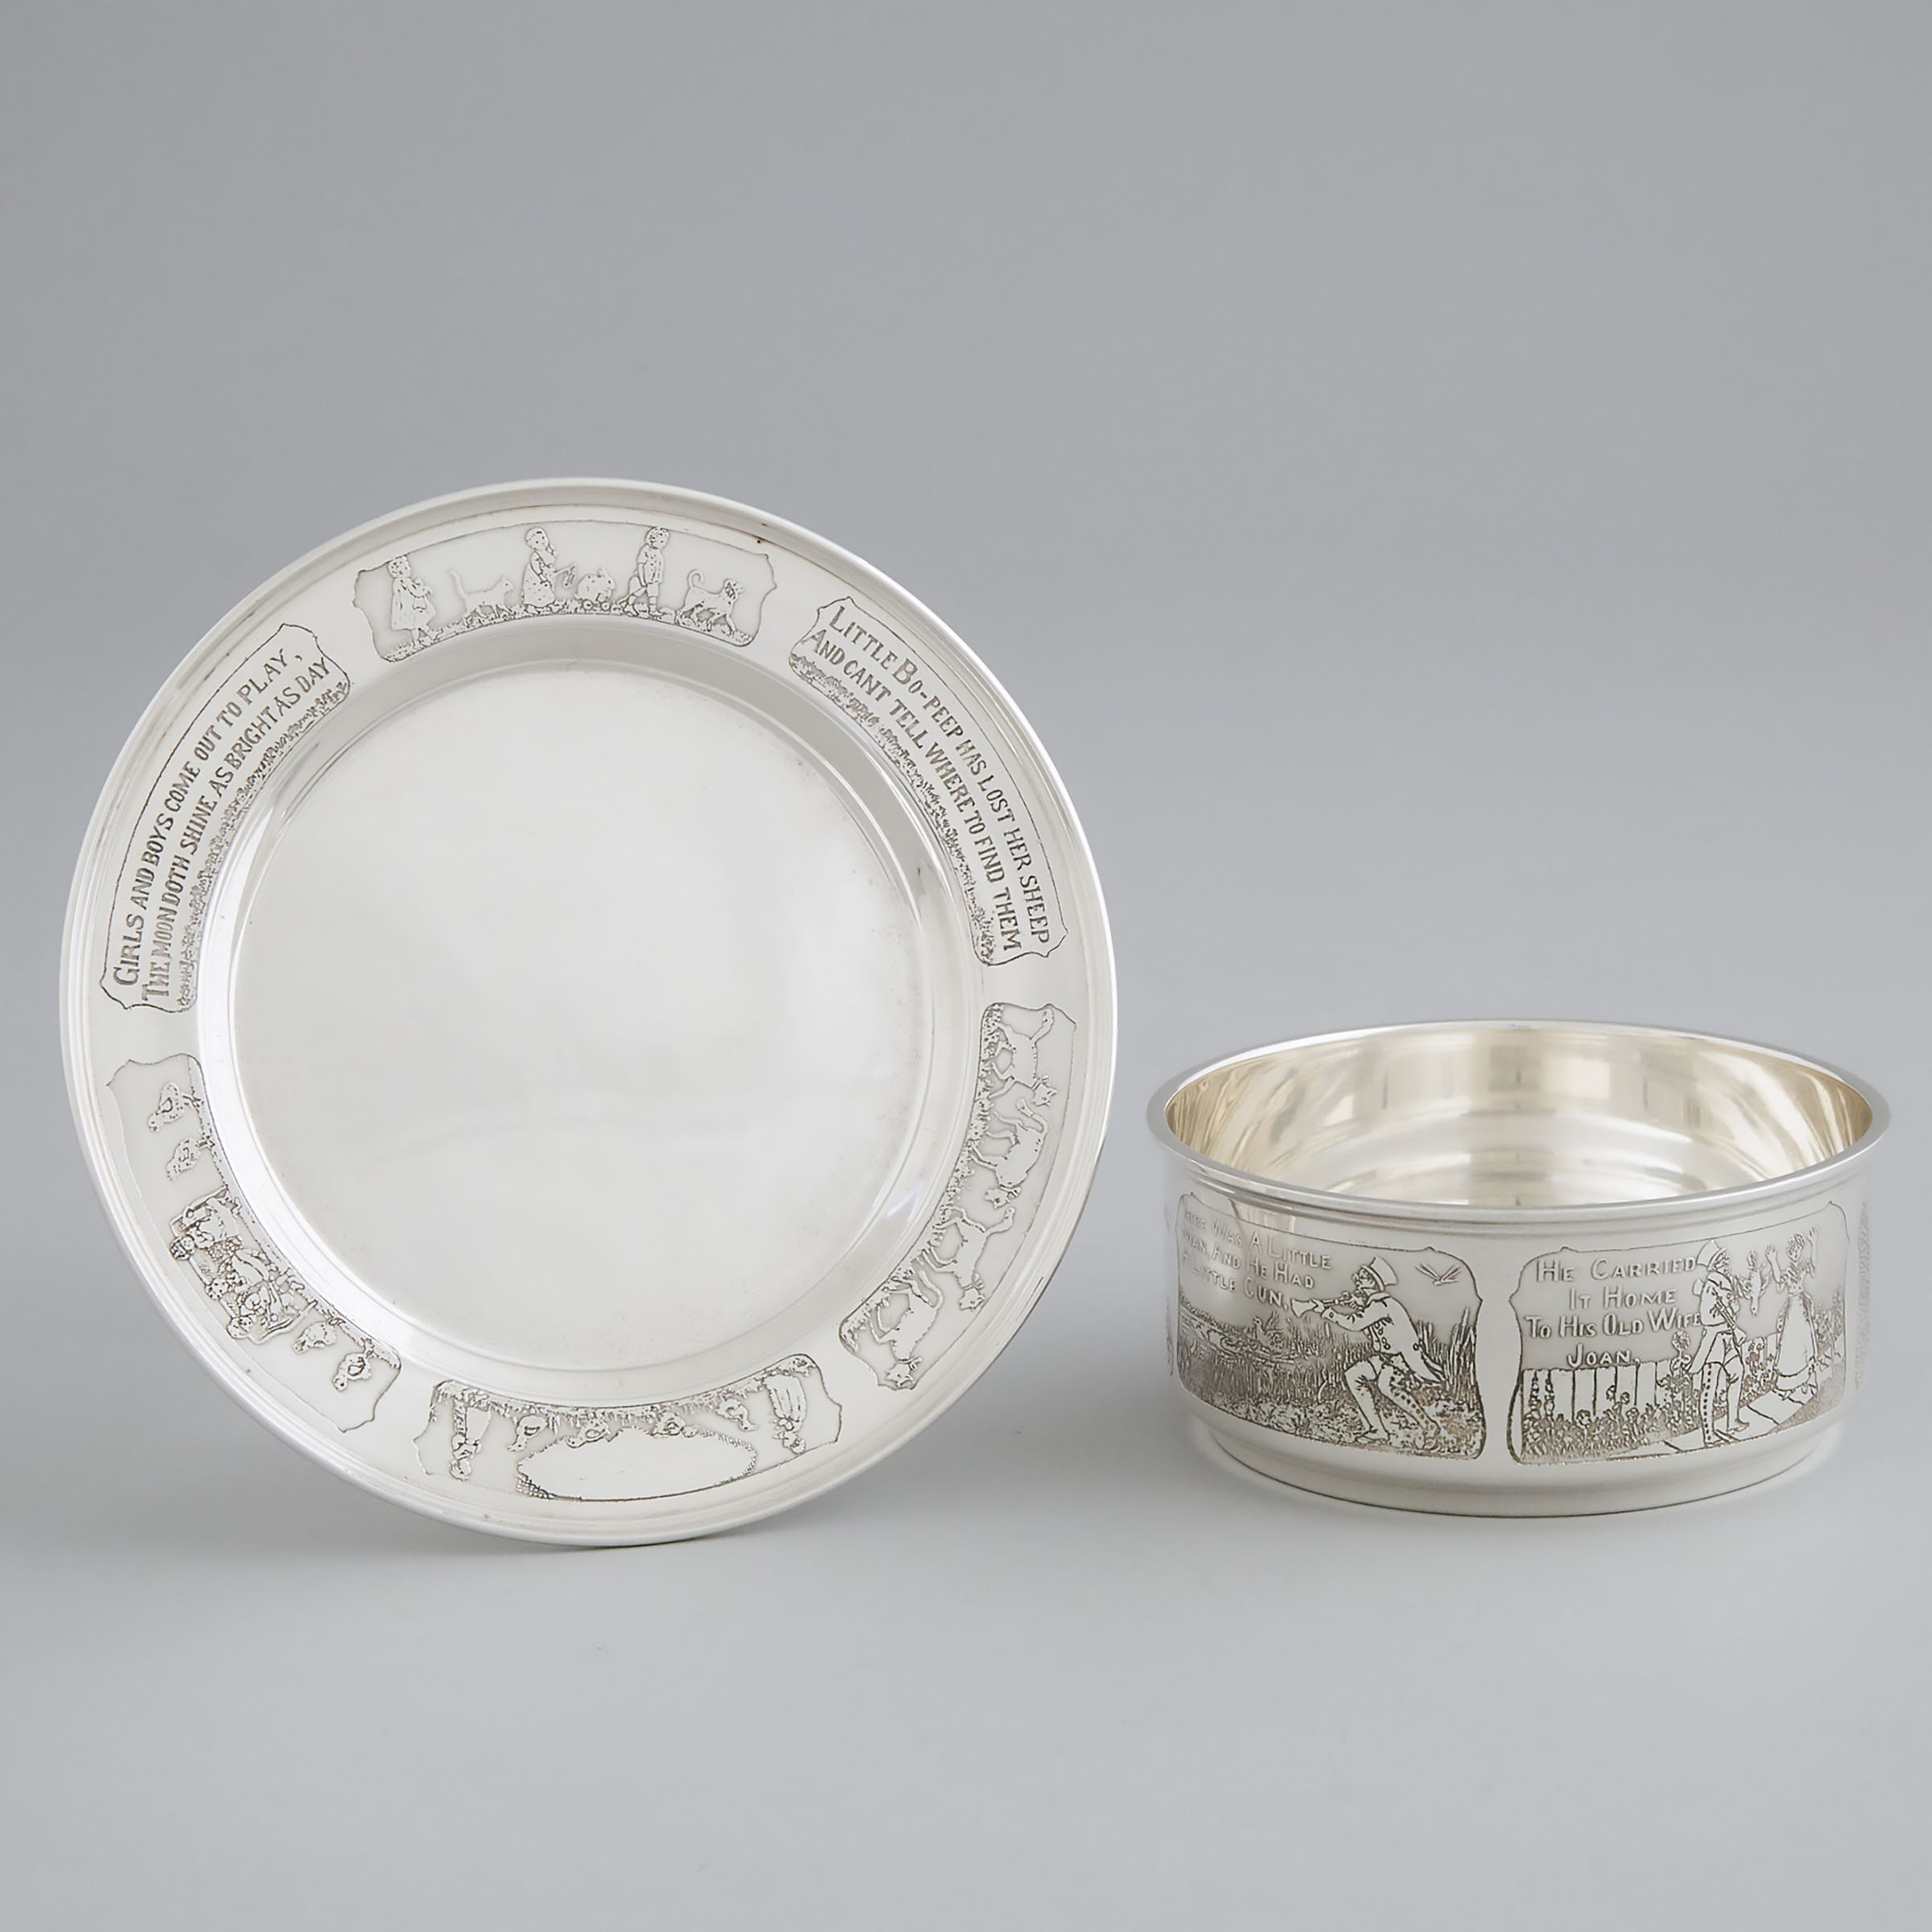 American Silver Child's 'Nursery Rhyme' Bowl and Plate, Watson Co., Attleboro, Mass., c.1920